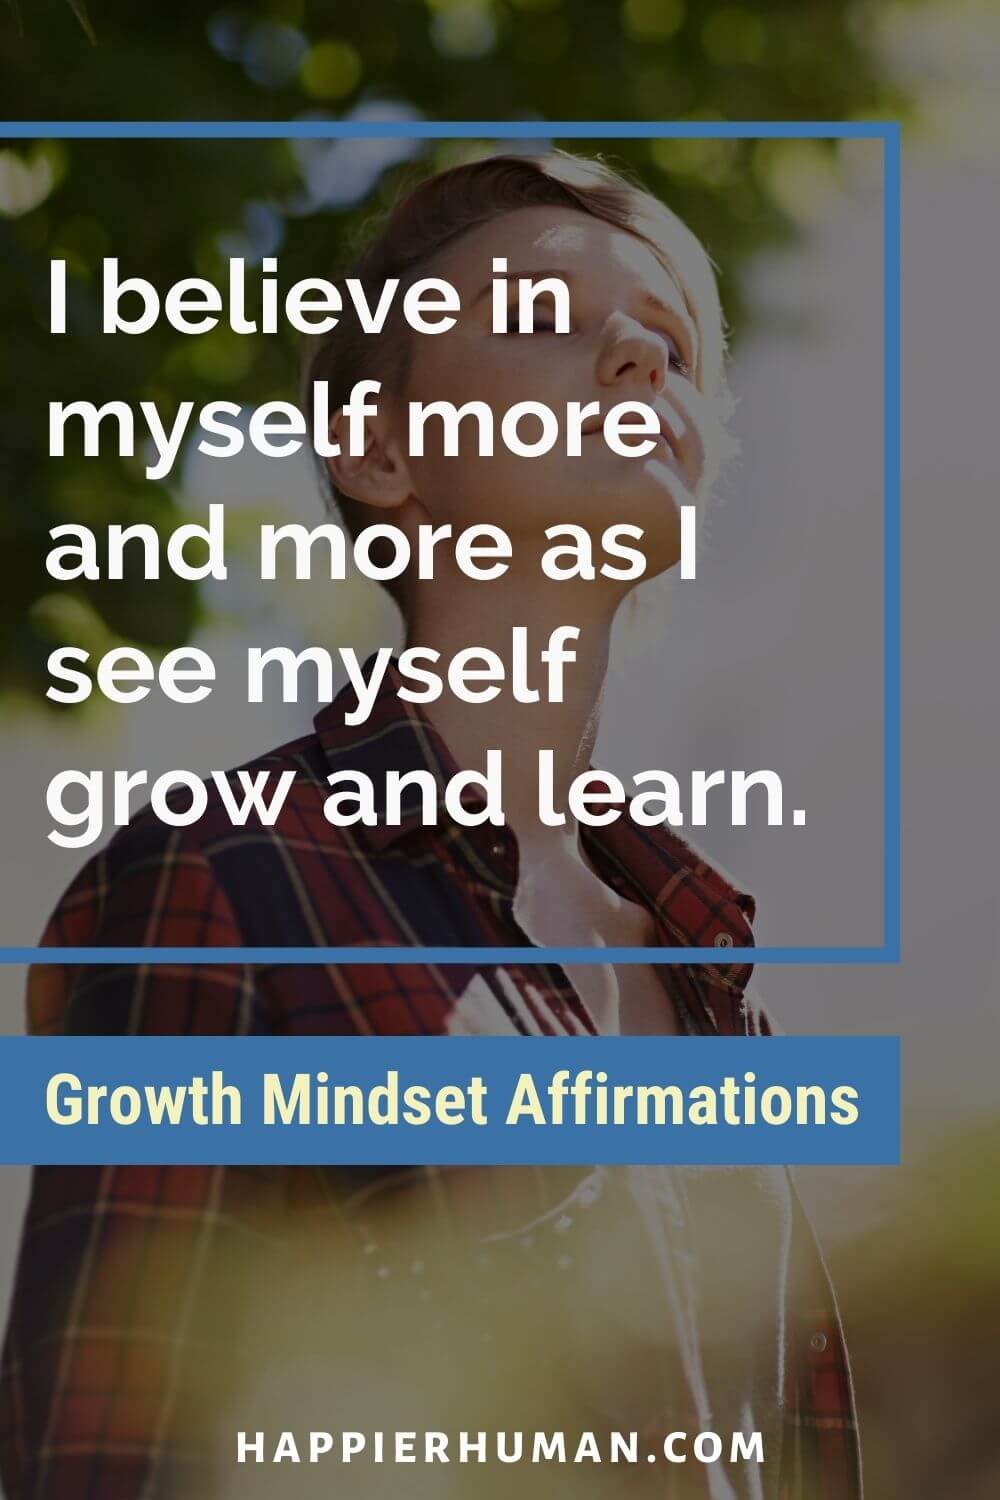 Growth Mindset Affirmations - I believe in myself more and more as I see myself grow and learn. | growth mindset quotes | positive mindset affirmations | my growth mindset statements